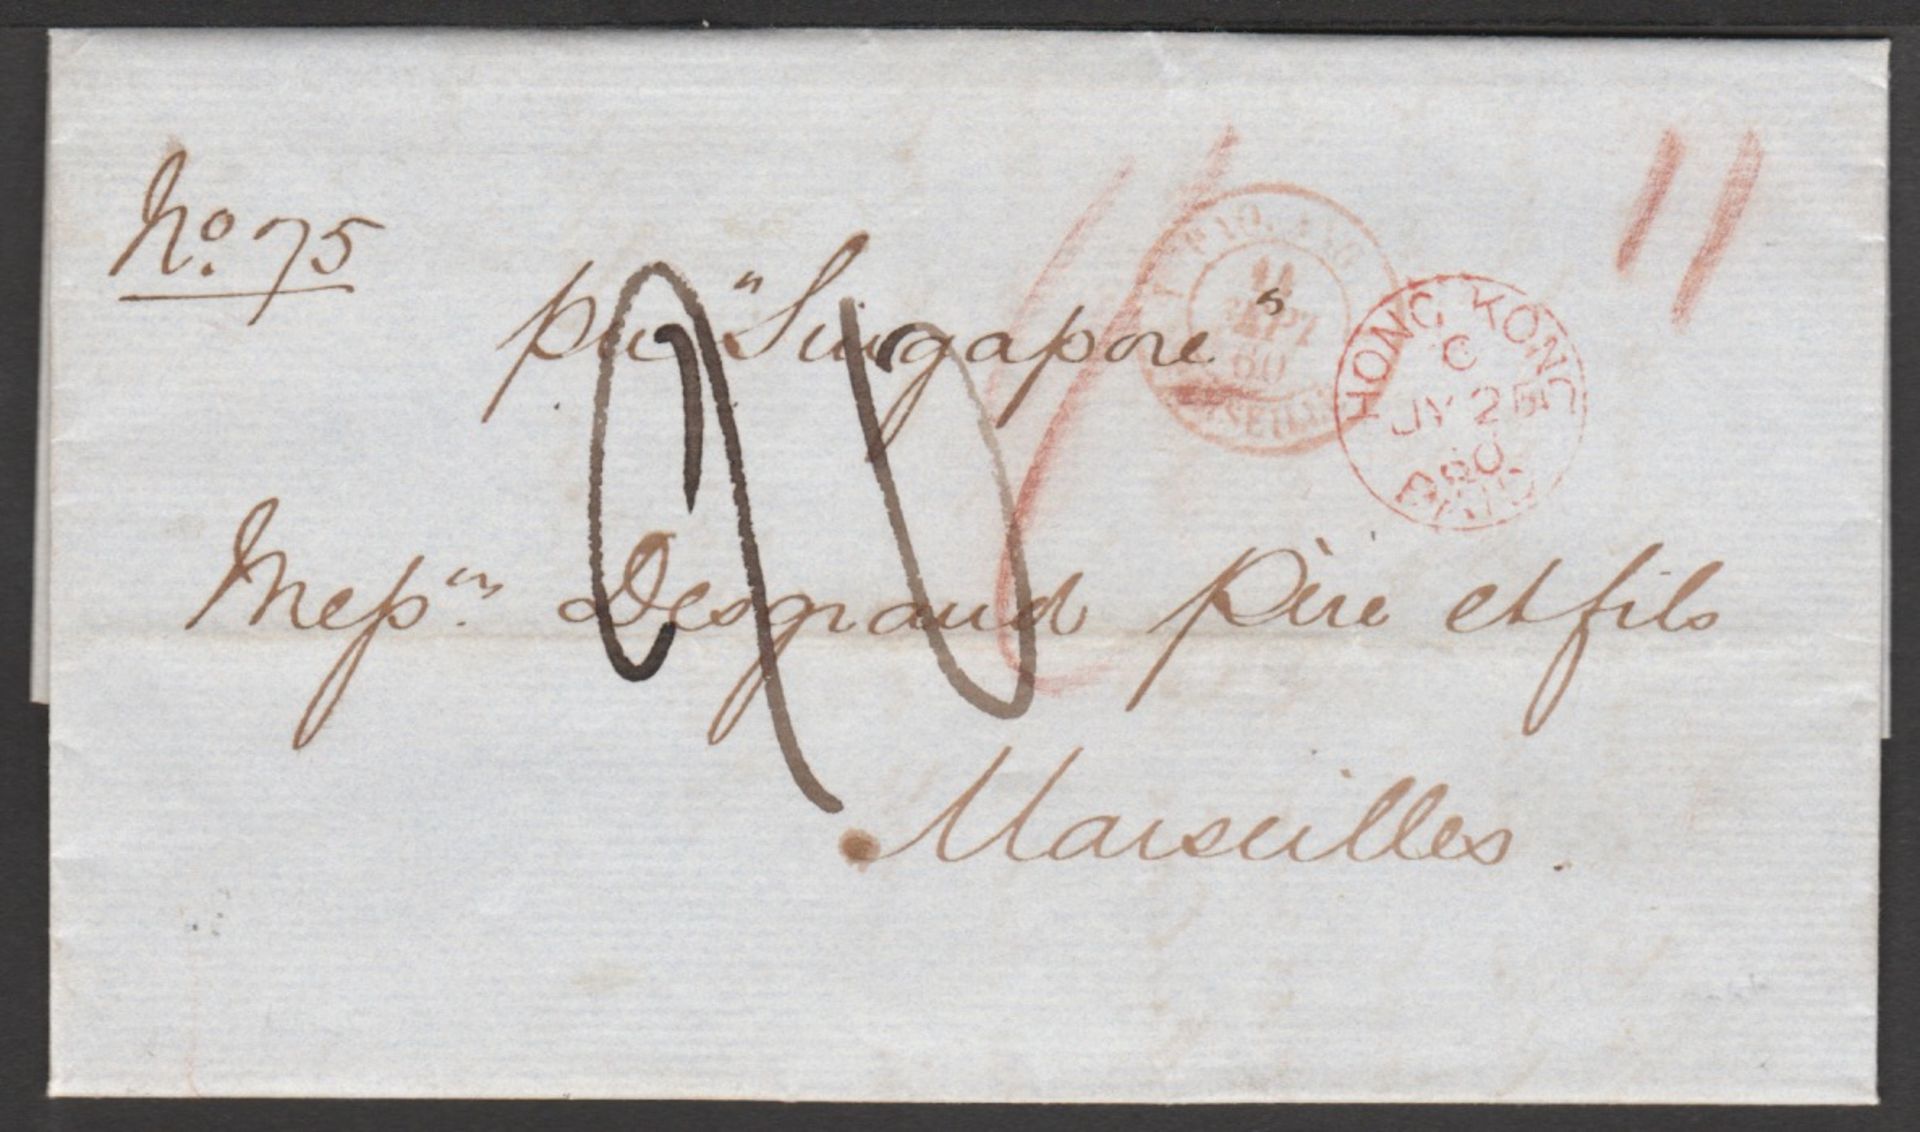 Hong Kong / Malta 1860 Entire letter prepaid 1/- from Hong Kong to Marseille endorsed ""Per Singapor